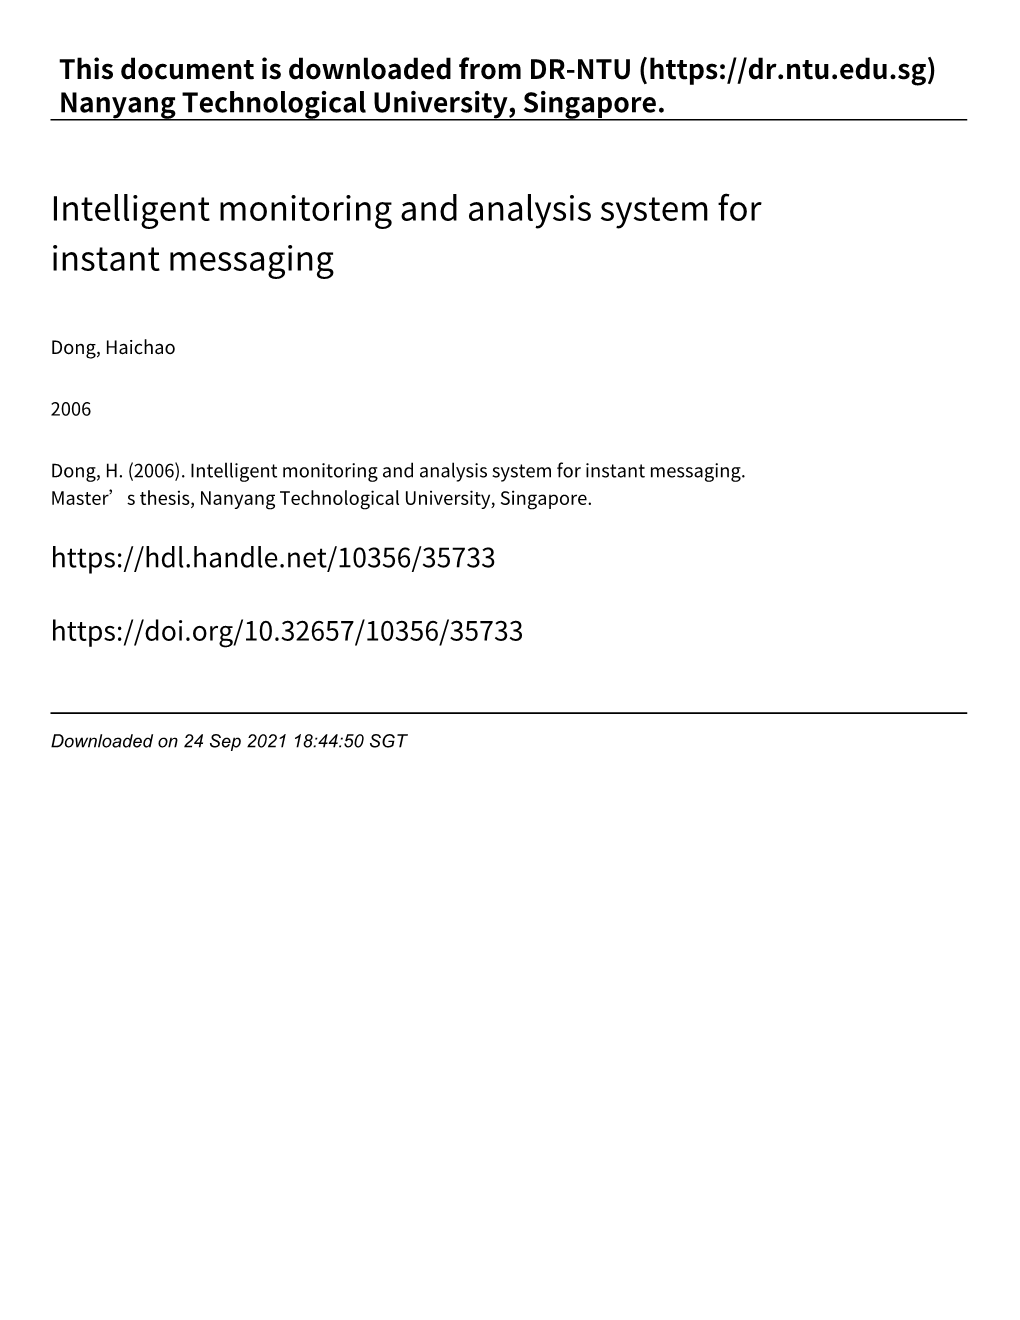 Intelligent Monitoring and Analysis System for Instant Messaging